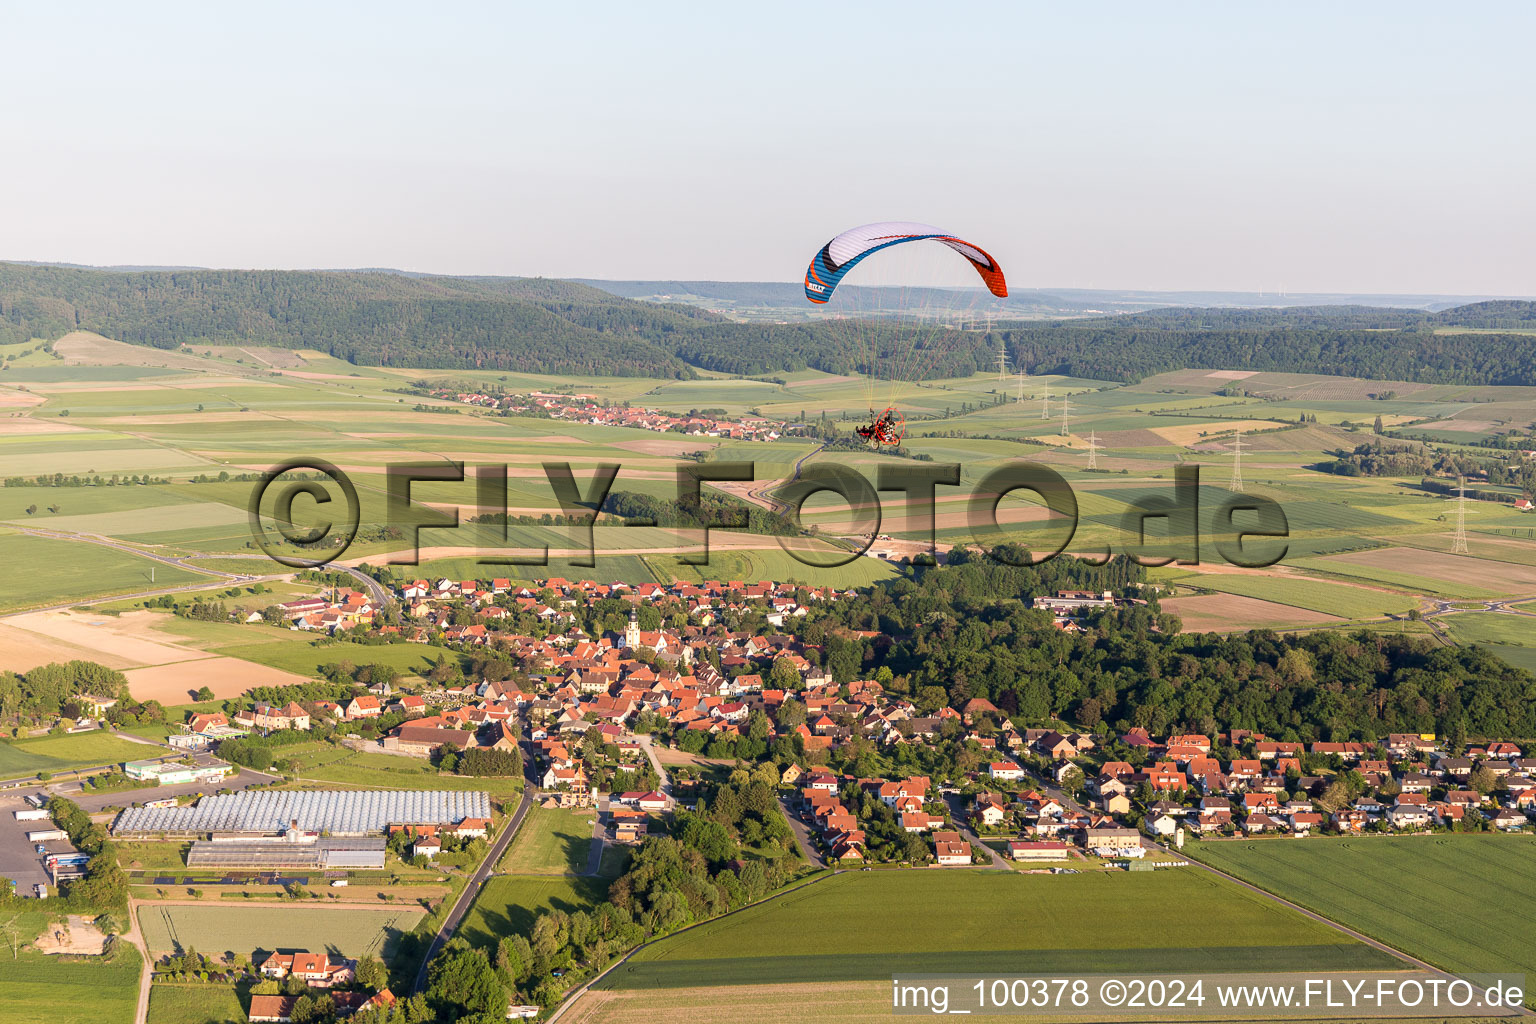 Paradlider over a Village on the edge of agricultural fields and farmland in Ruedenhausen in the state Bavaria, Germany